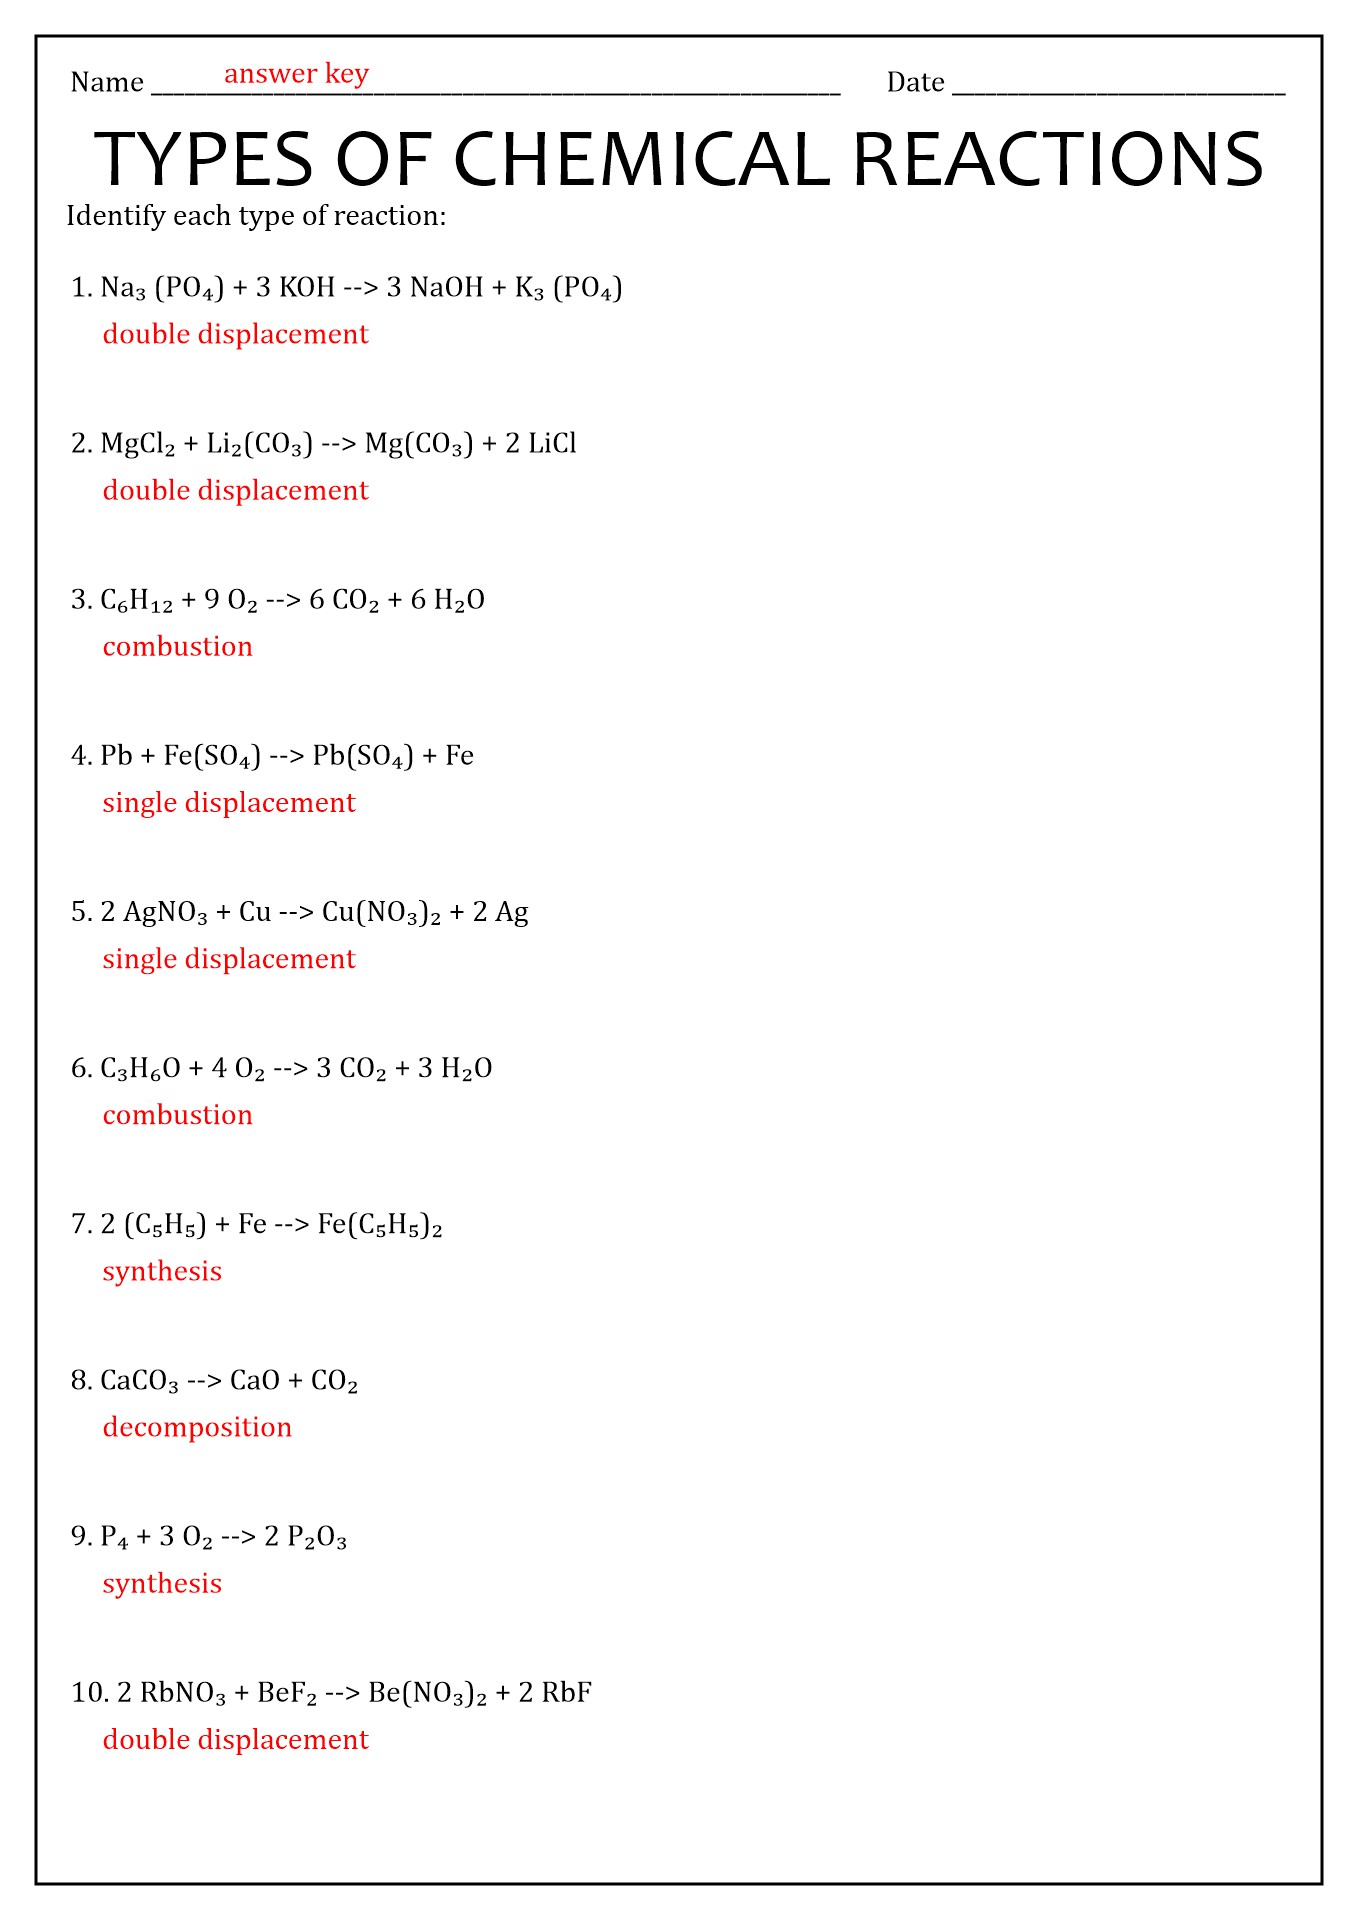 types-of-chemical-reactions-worksheet-free-download-qstion-co